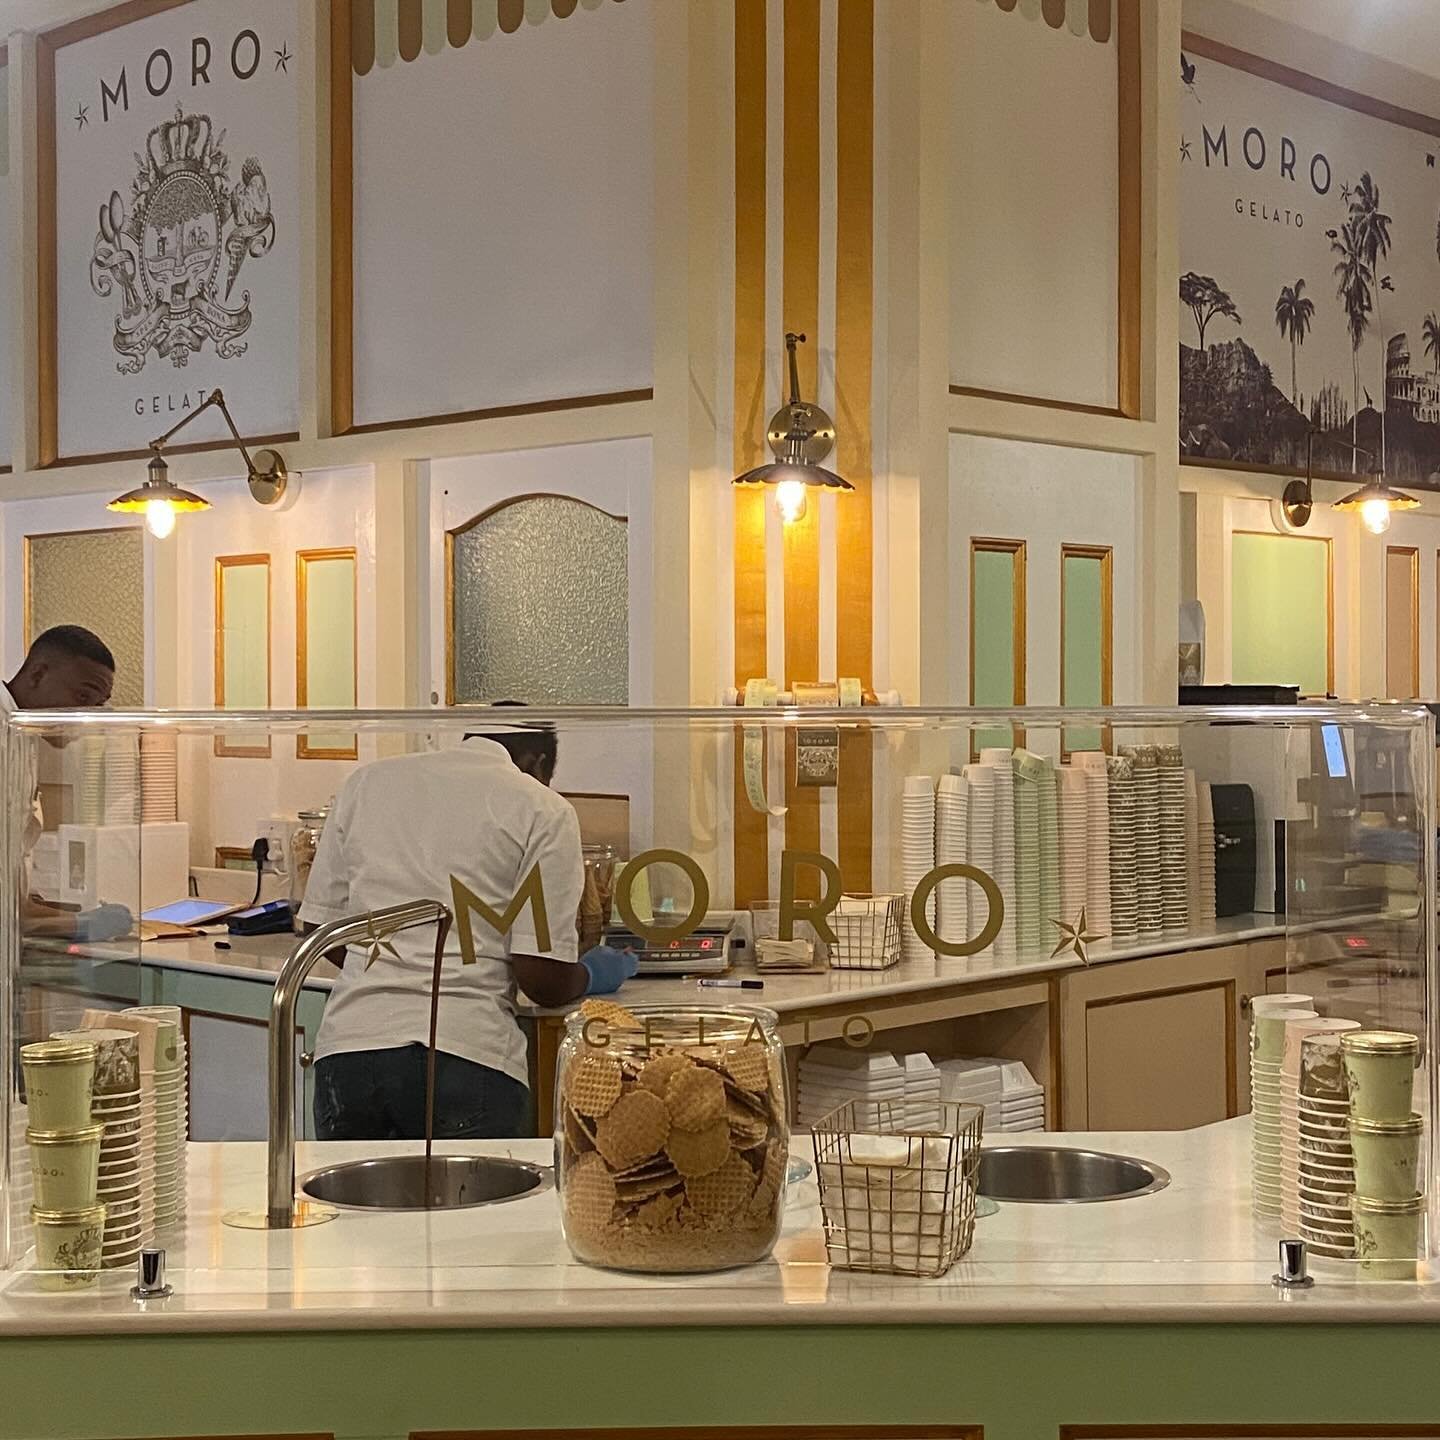 We can&rsquo;t stop thinking about @morogelato 🍦 

#morogelato #gelatolovers #capetownfoodie #icecreamshop #gelatoshop #capetowndesserts #capetownrestaurants #placestovisit #capetowntodo #aesthetics #aestheticfood #slowliving #leisureclub #travelblo